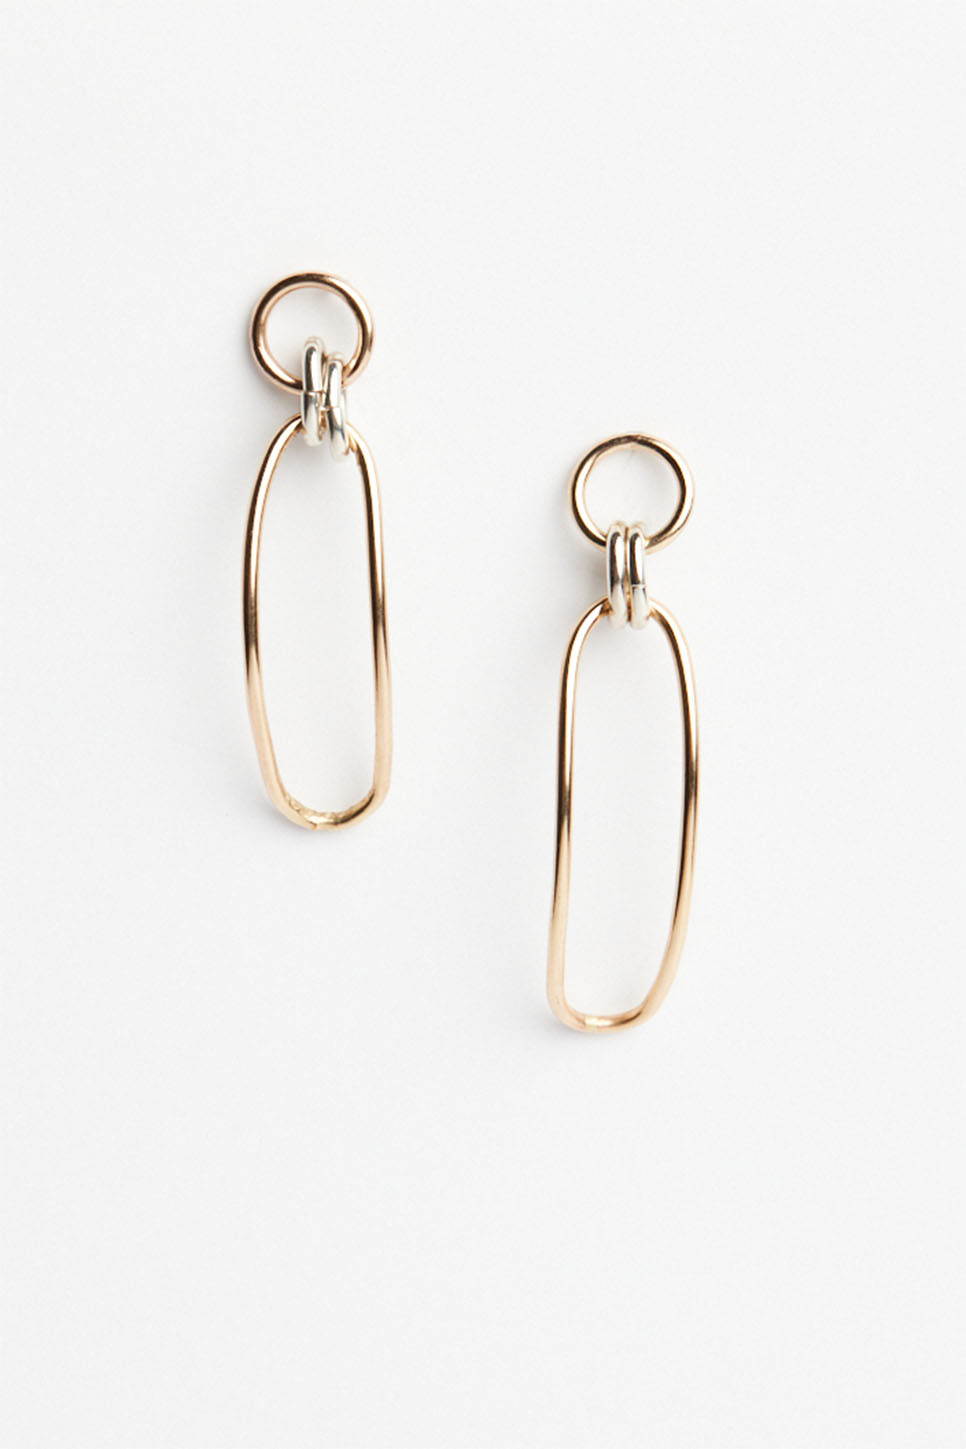 Able - Date Night Earrings - Two Tone